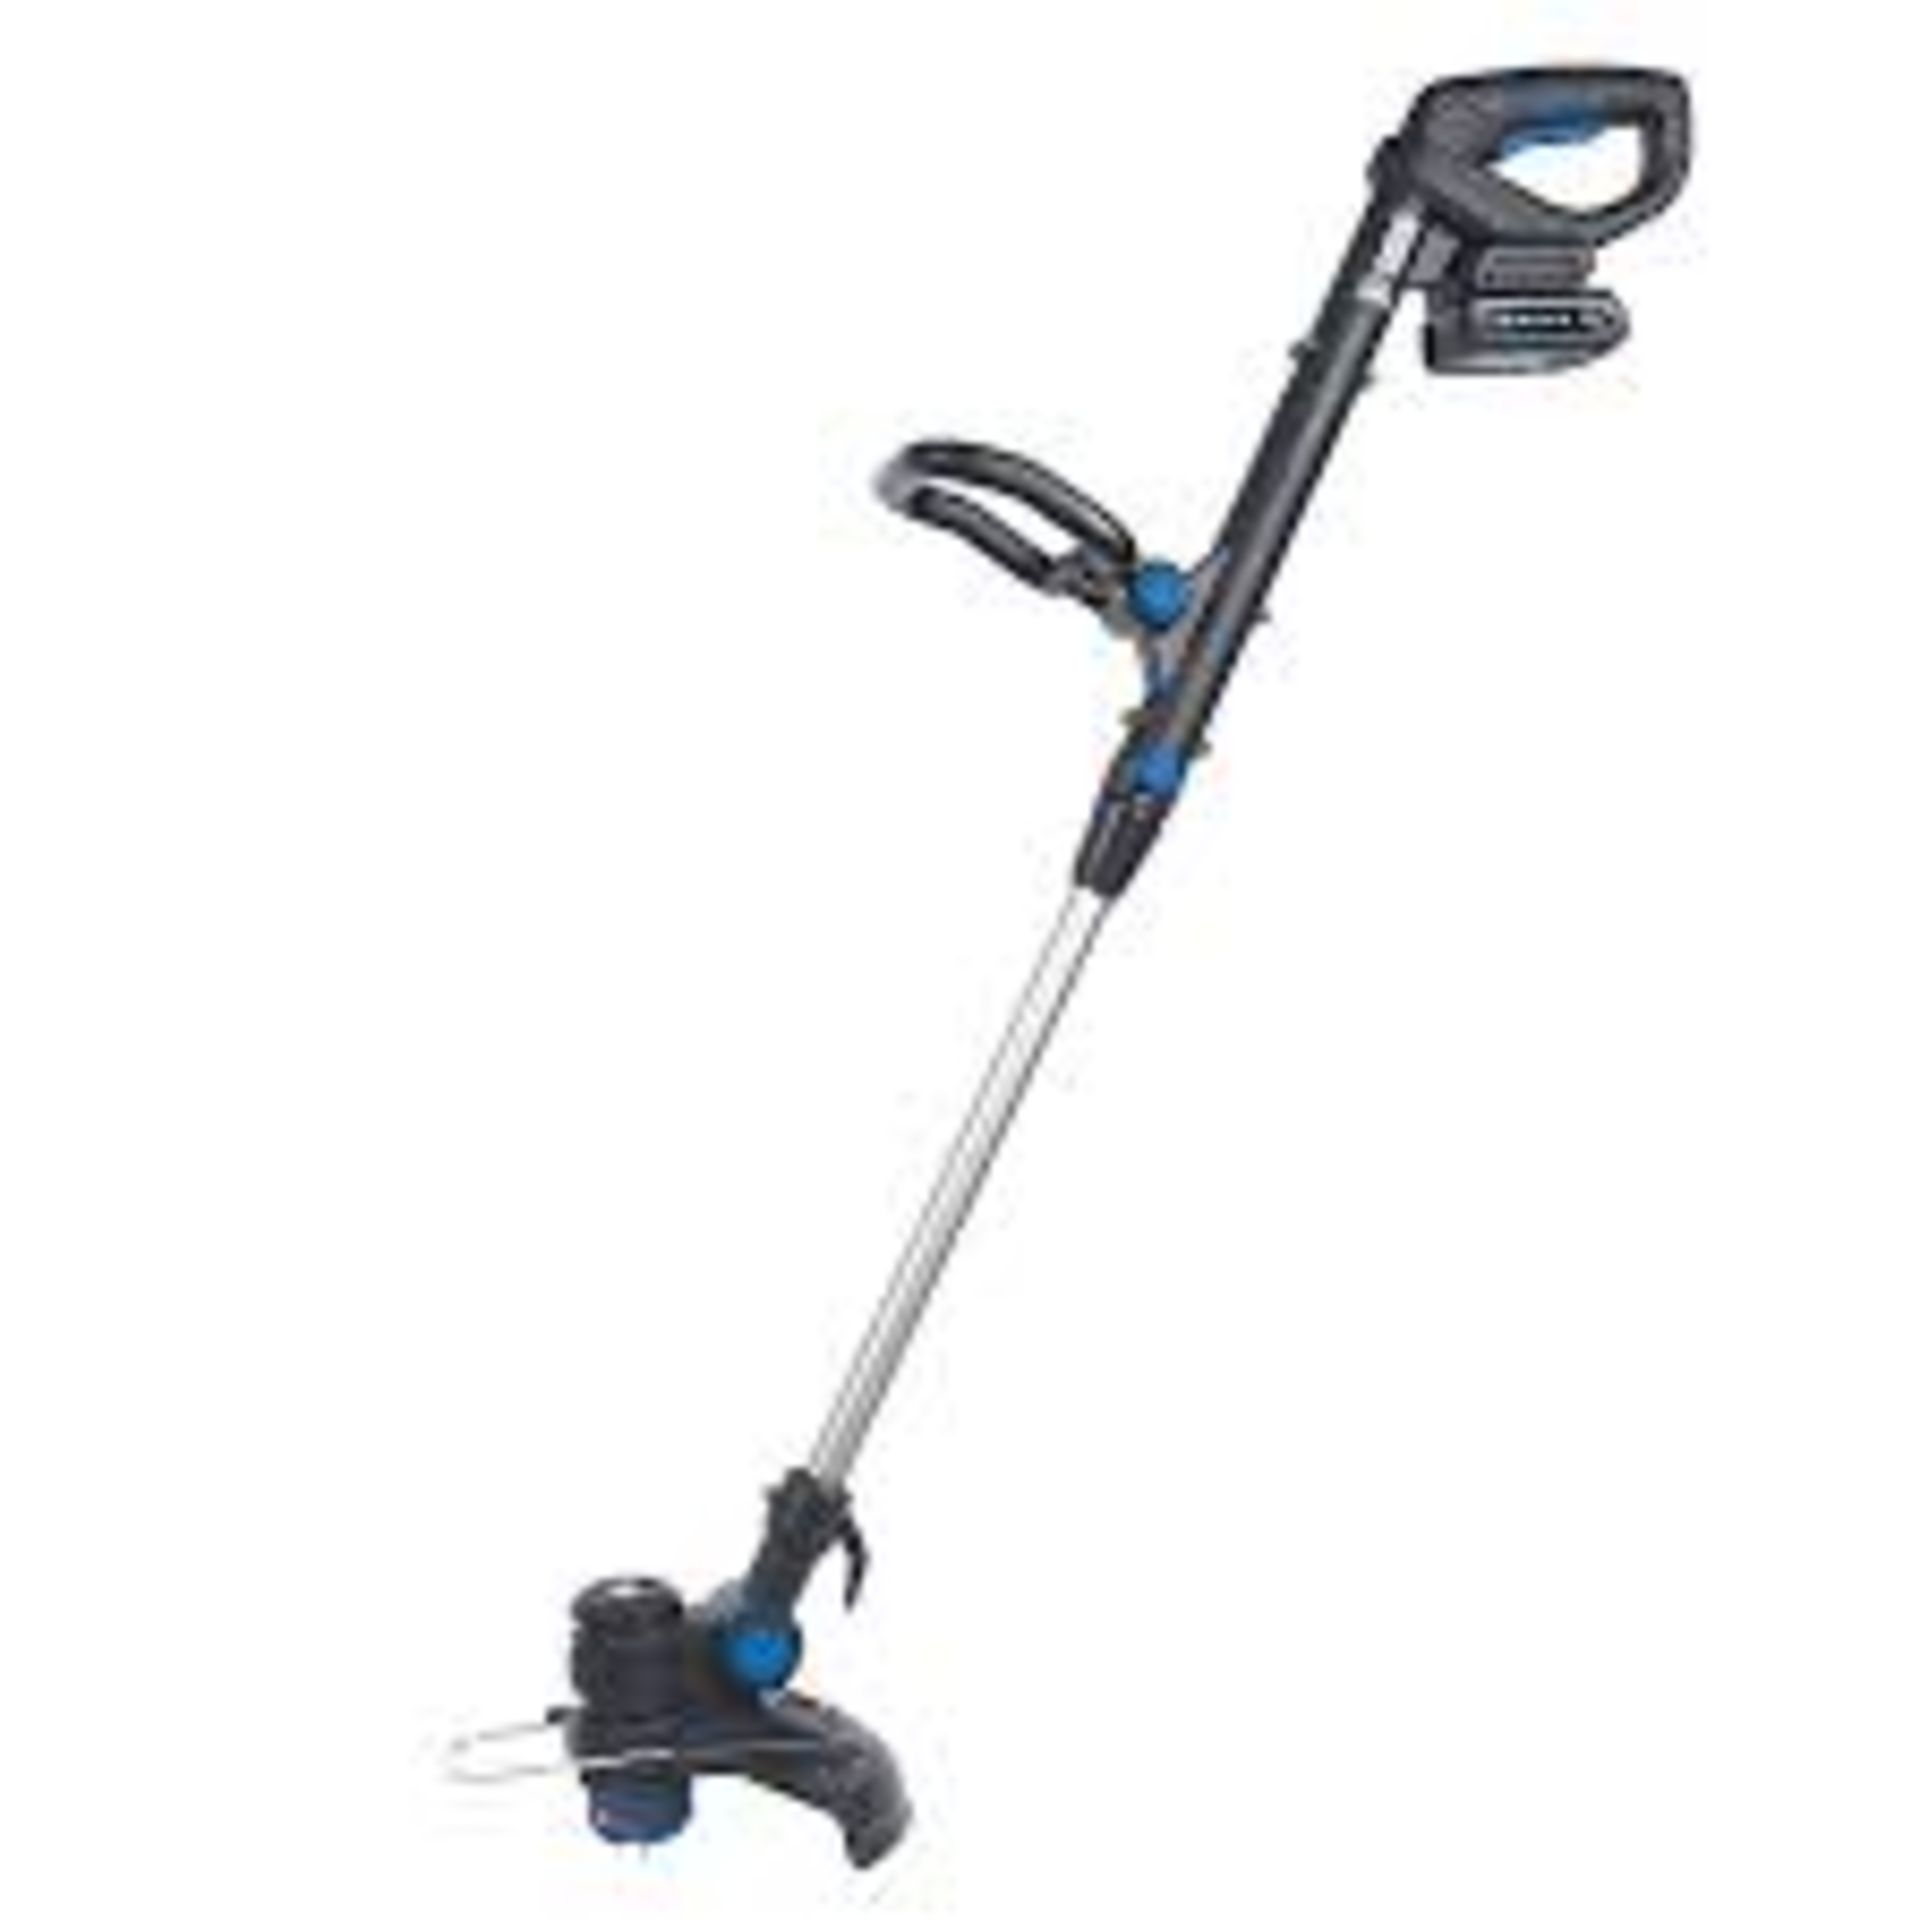 Mac Allister Solo 18V 250mm Cordless Grass trimmer MGT1825. - PW.